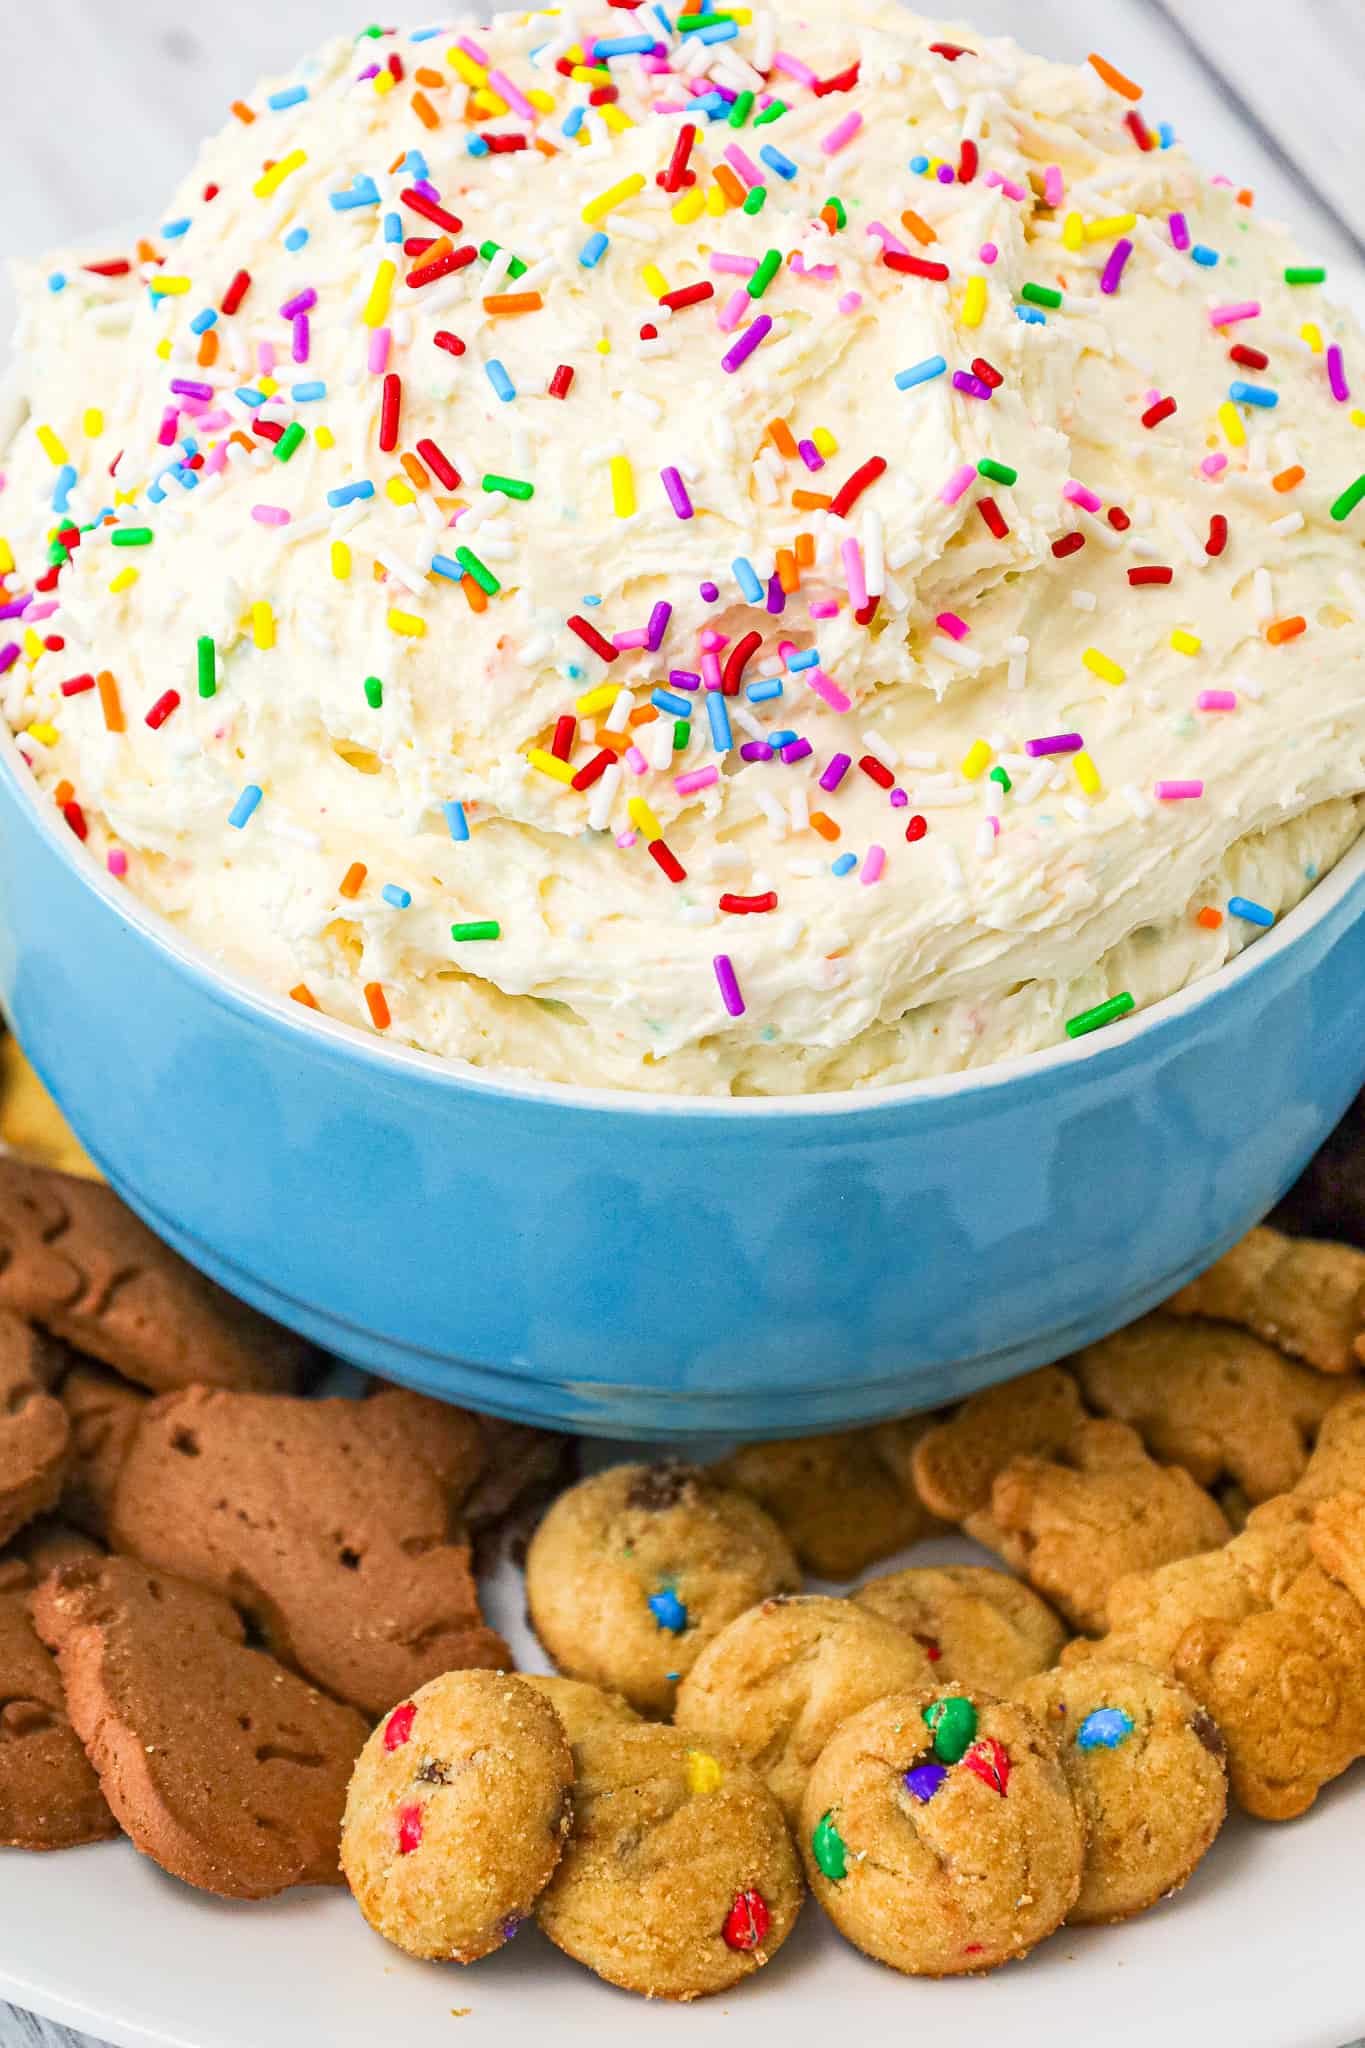 Dunkaroo Dip is a simple and delicious funfetti cake batter dip recipe that will remind you of the childhood treat.